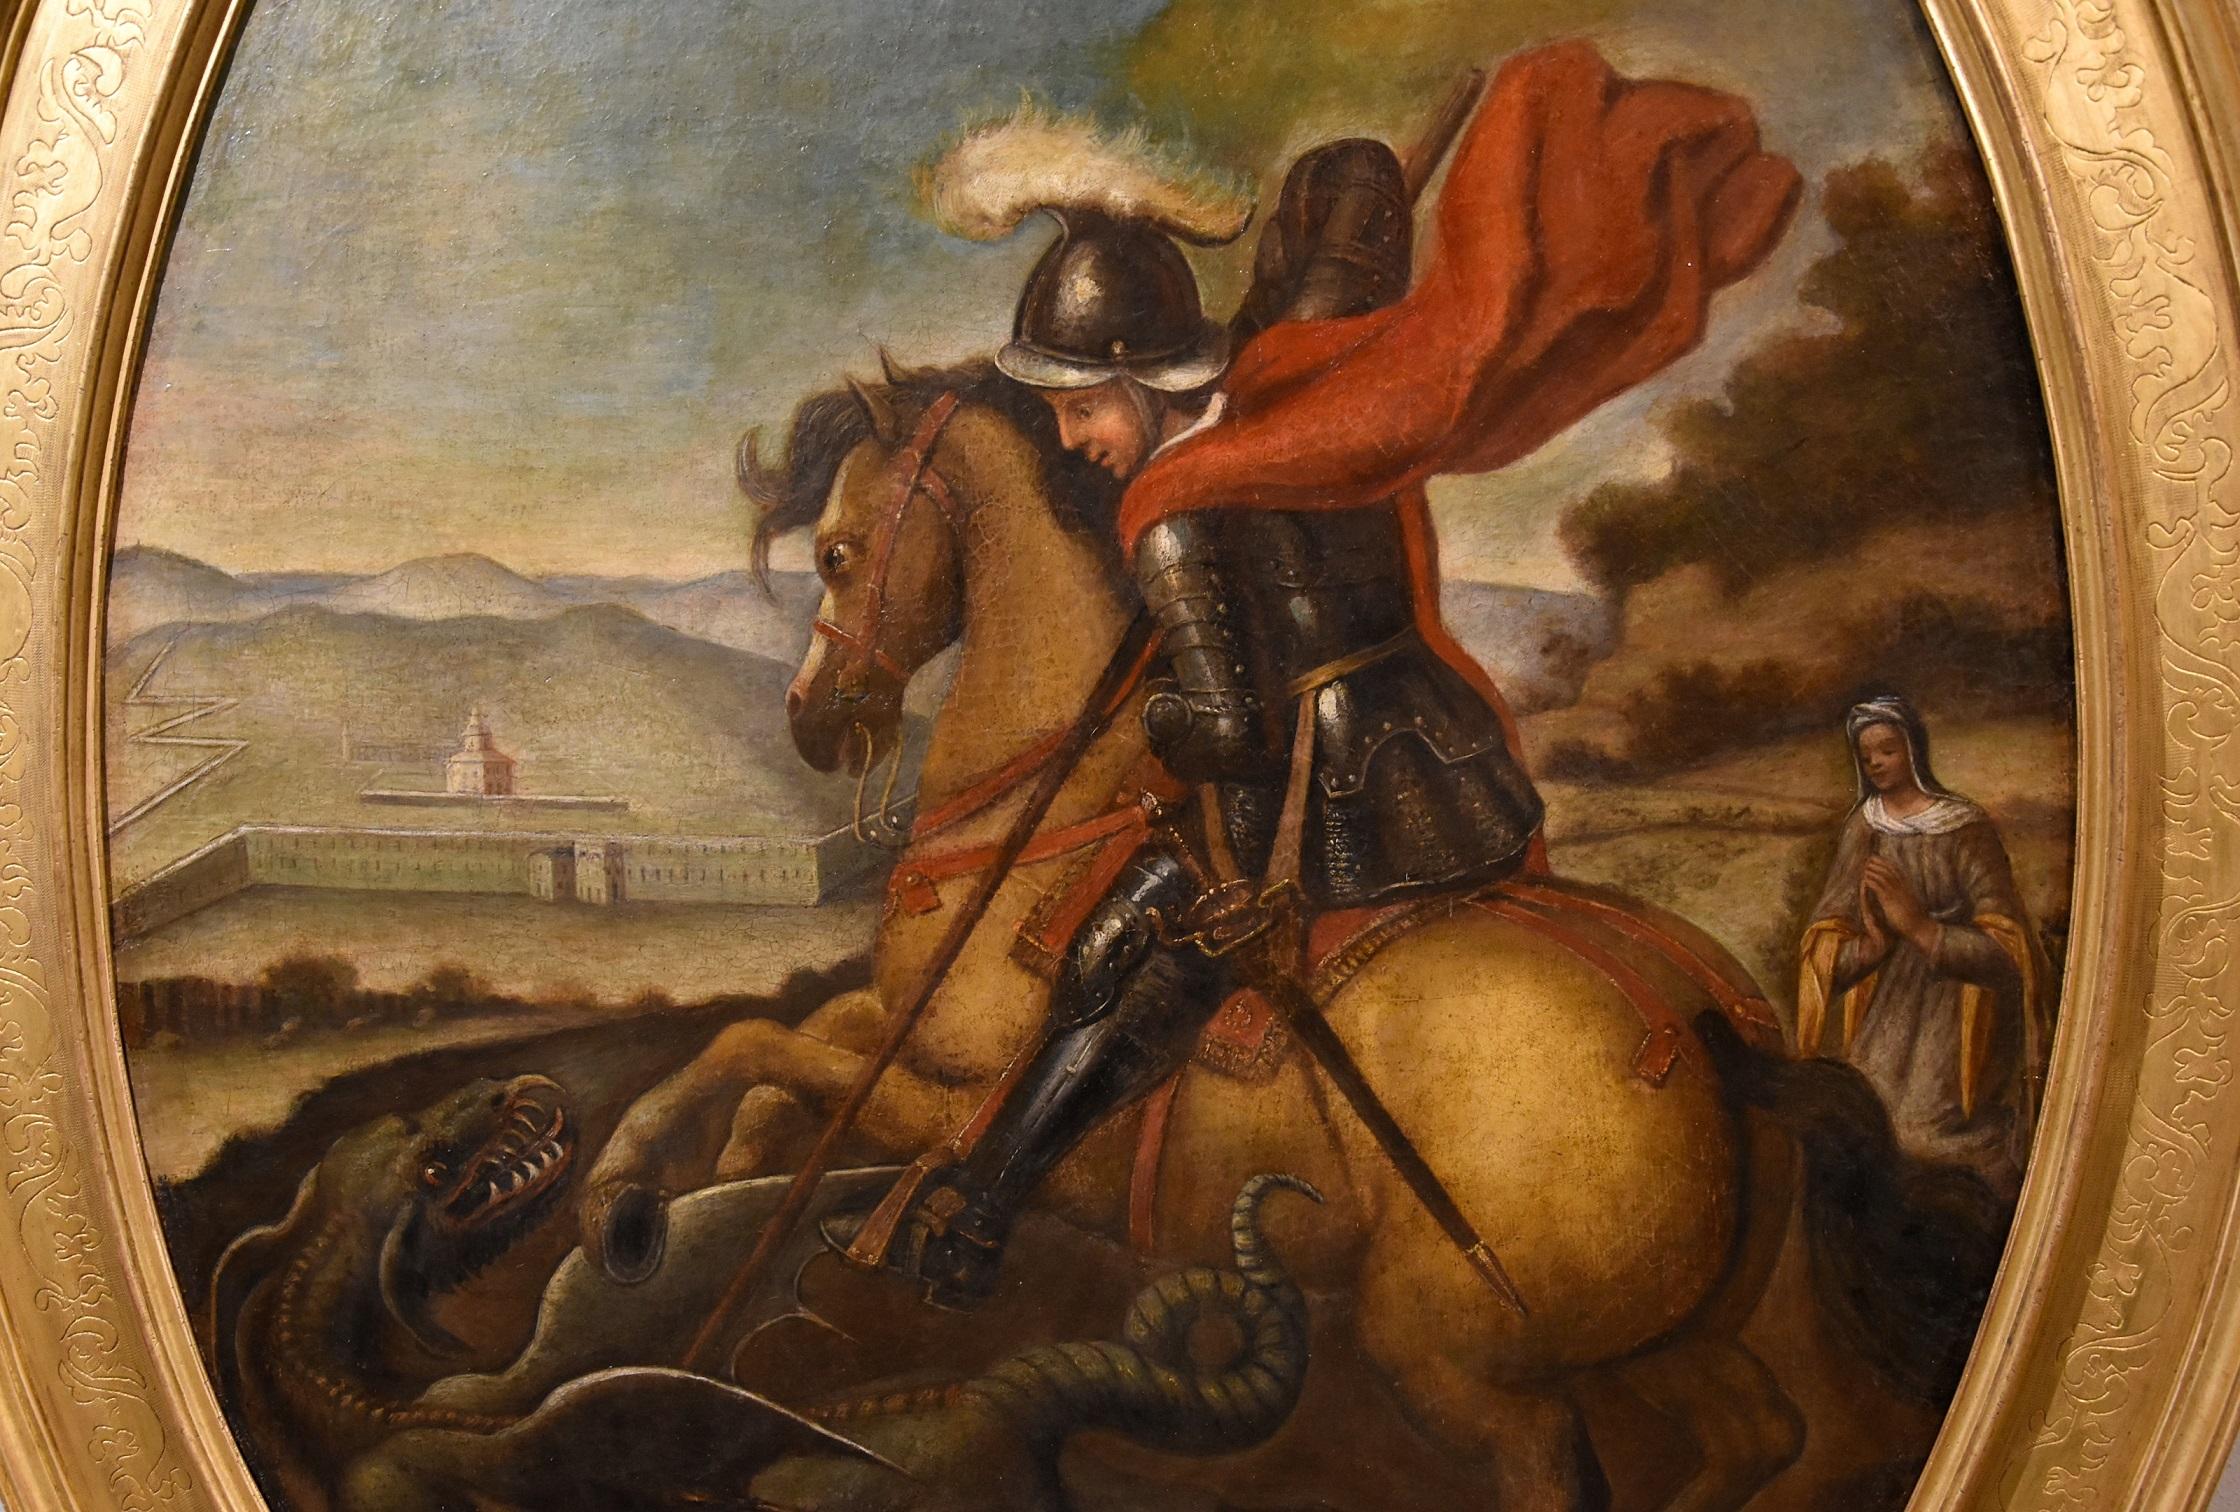 St. George Defeats the Dragon
Follower of Raphael Sanzio (Urbino, 1483 - Rome, 1520), 17th-18th century

Oil on oval canvas
124 x 95 cm./ in frame 148 x 118 cm.

The painting evocatively illustrates the triumph against the dragon of St. George, a